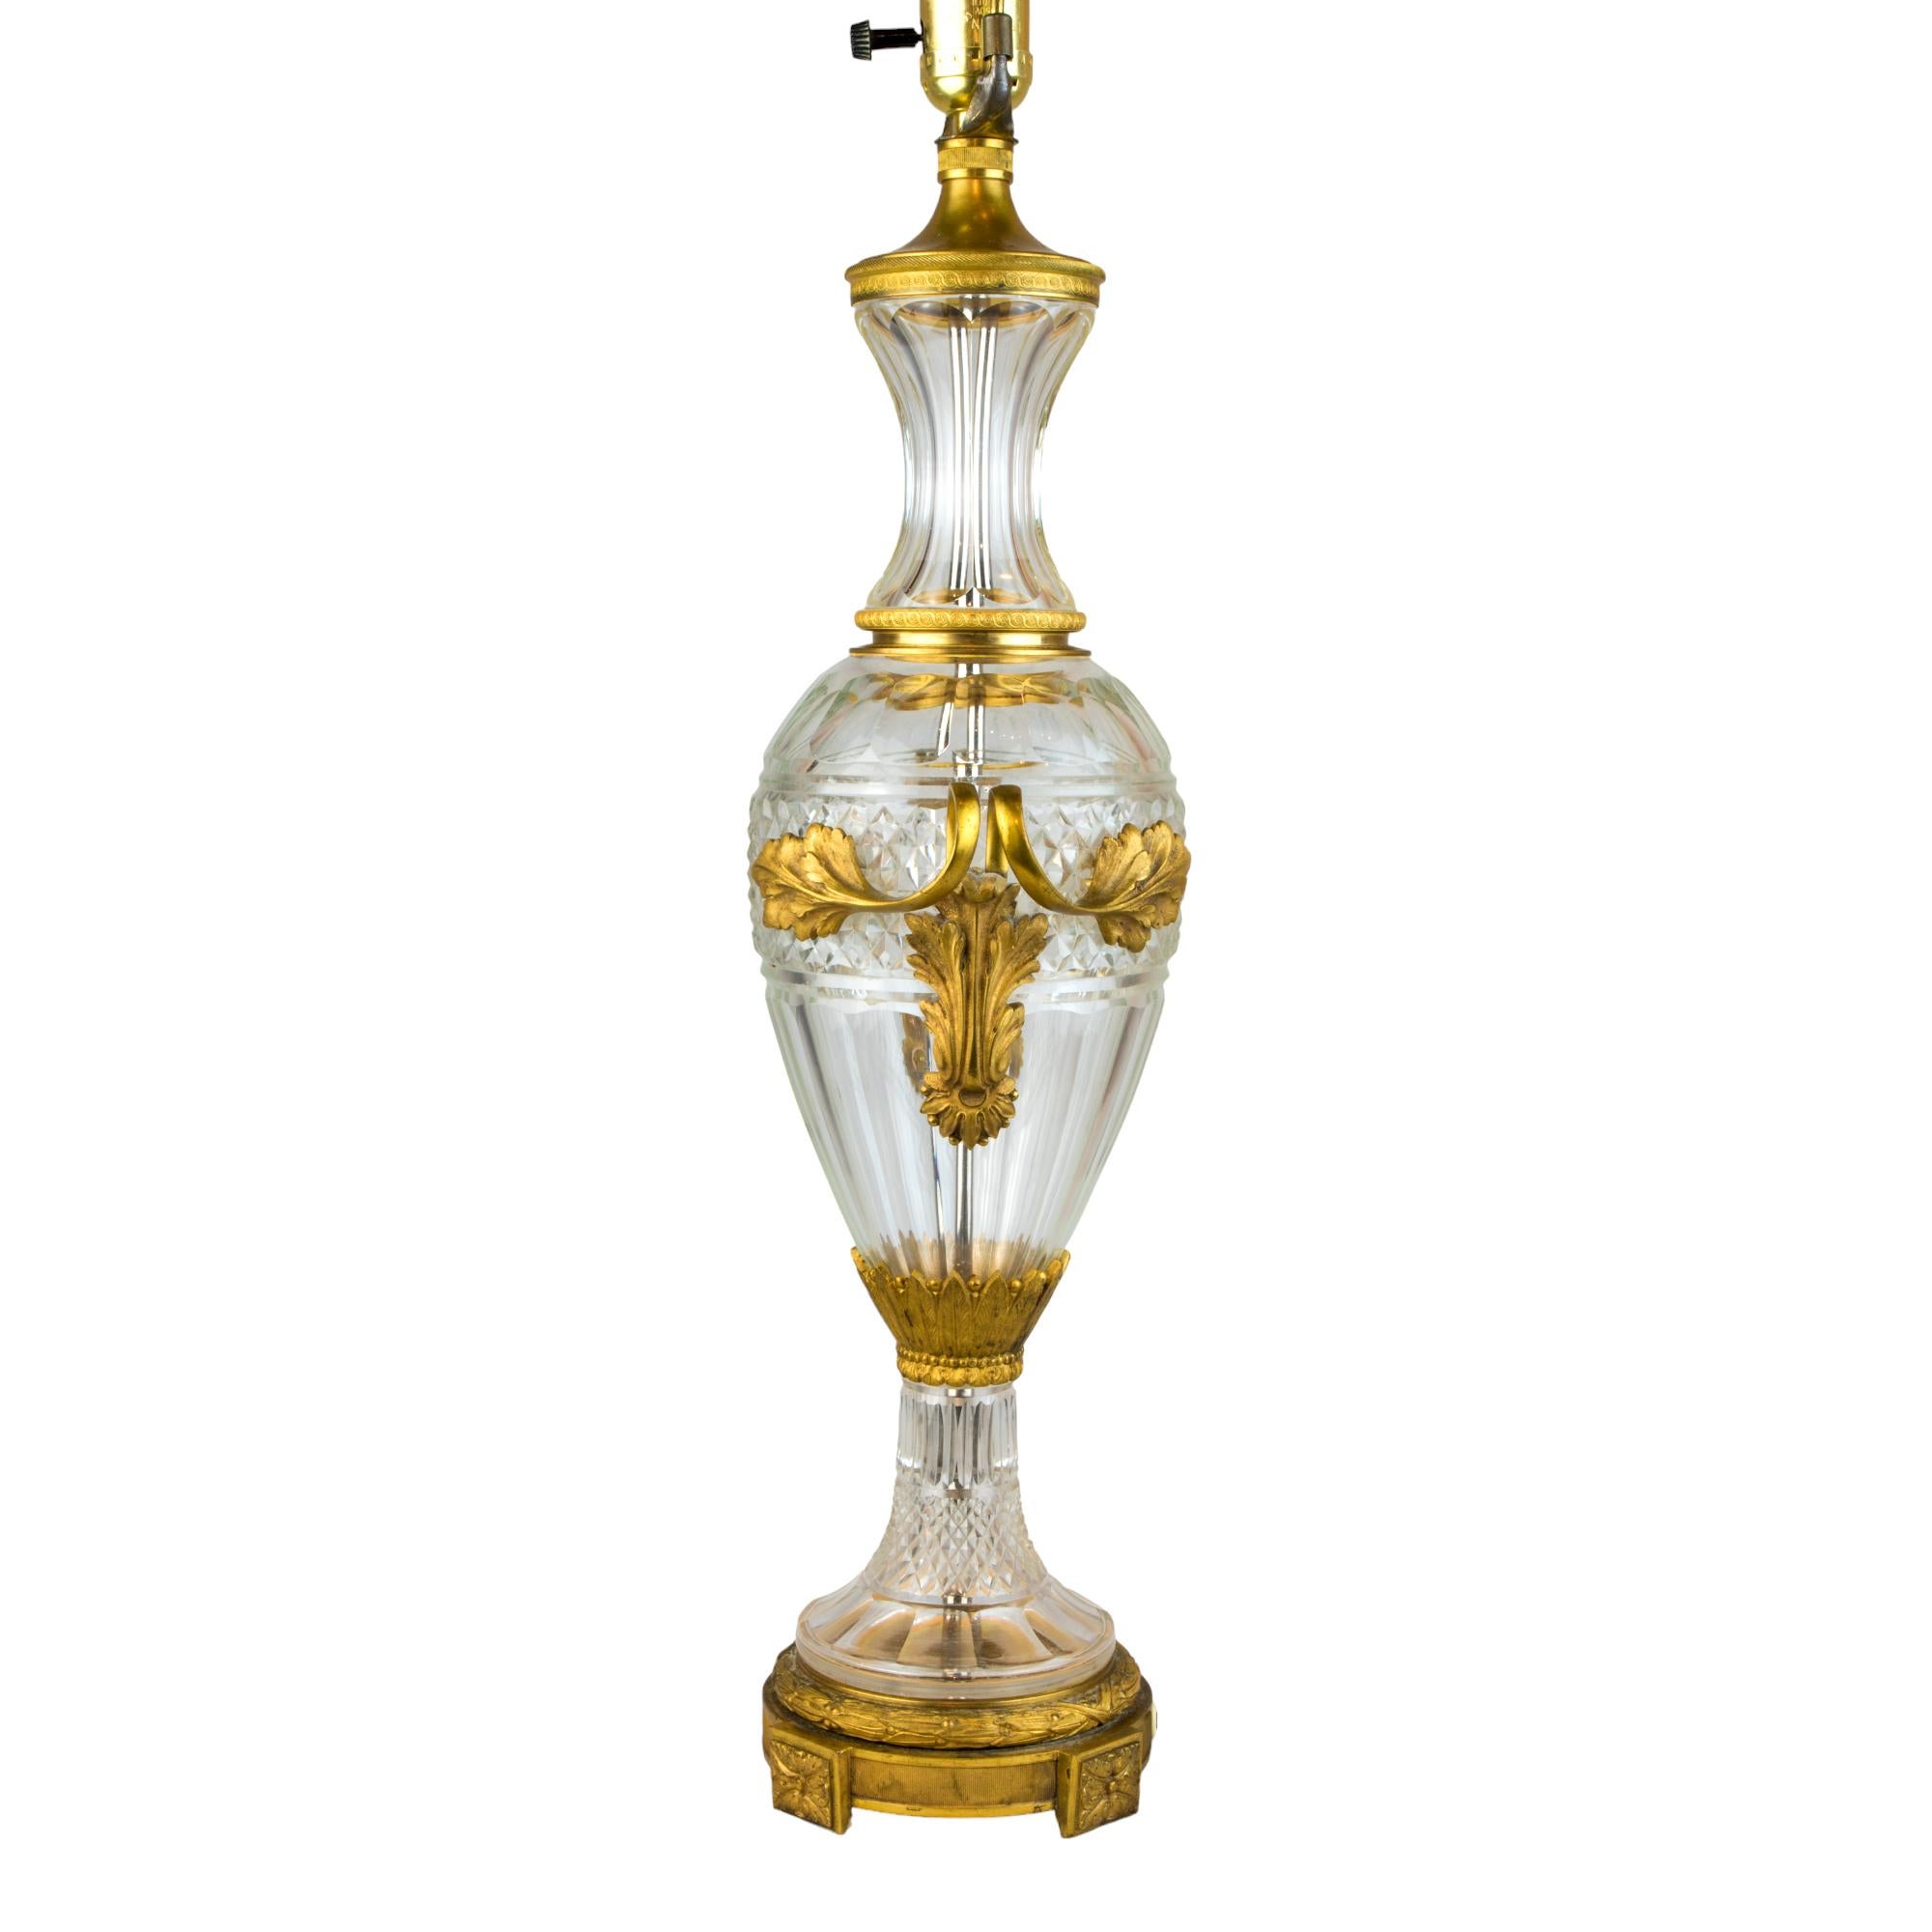 19th Century Pair of Louis XVI Style Gilt-Bronze  Mounted Cut Glass Two-Handled Table Lamps